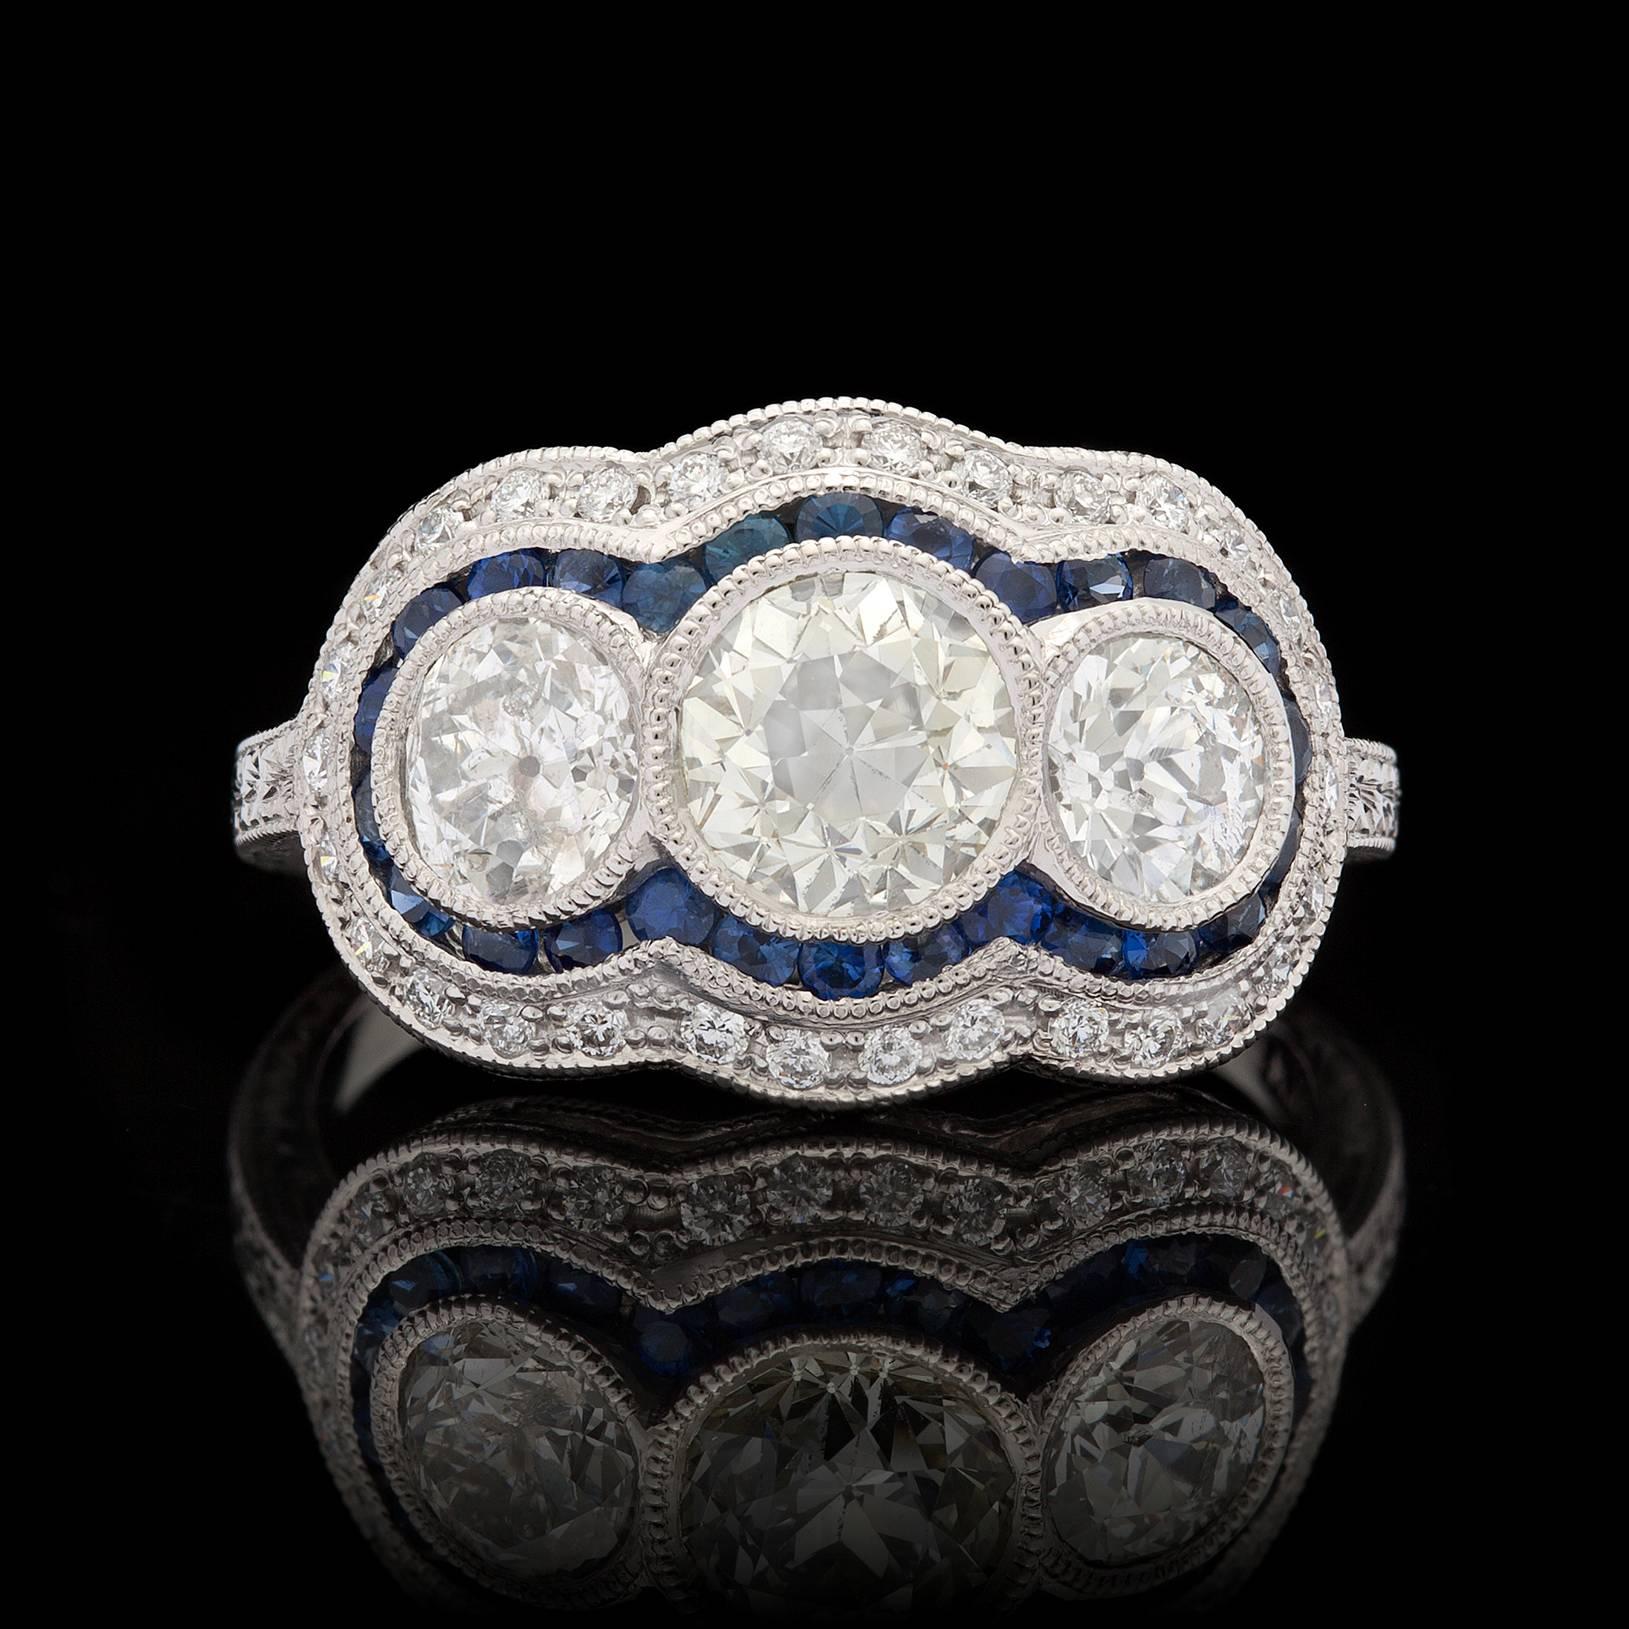 Custom platinum diamond Edwardian style ring features three old mine cut diamonds for approximately 1.82 ct. tw. with a lovely border of 26 blue sapphires and 30 additional round cut diamonds. The total carat weight for the additional 30 diamonds is